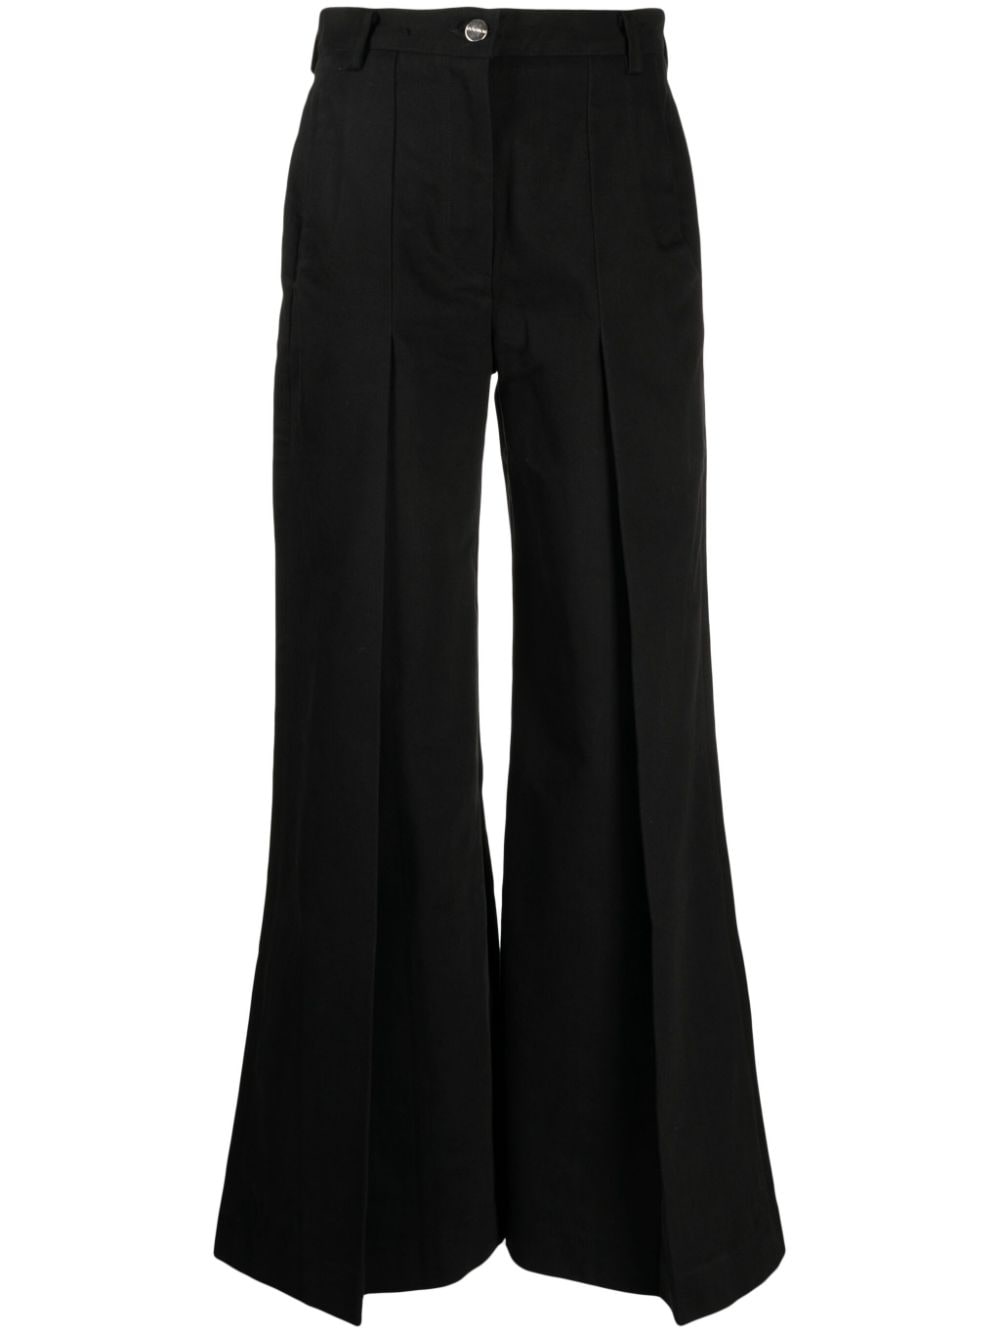 GOLDSIGN The Clean wide-leg trousers - Black von GOLDSIGN